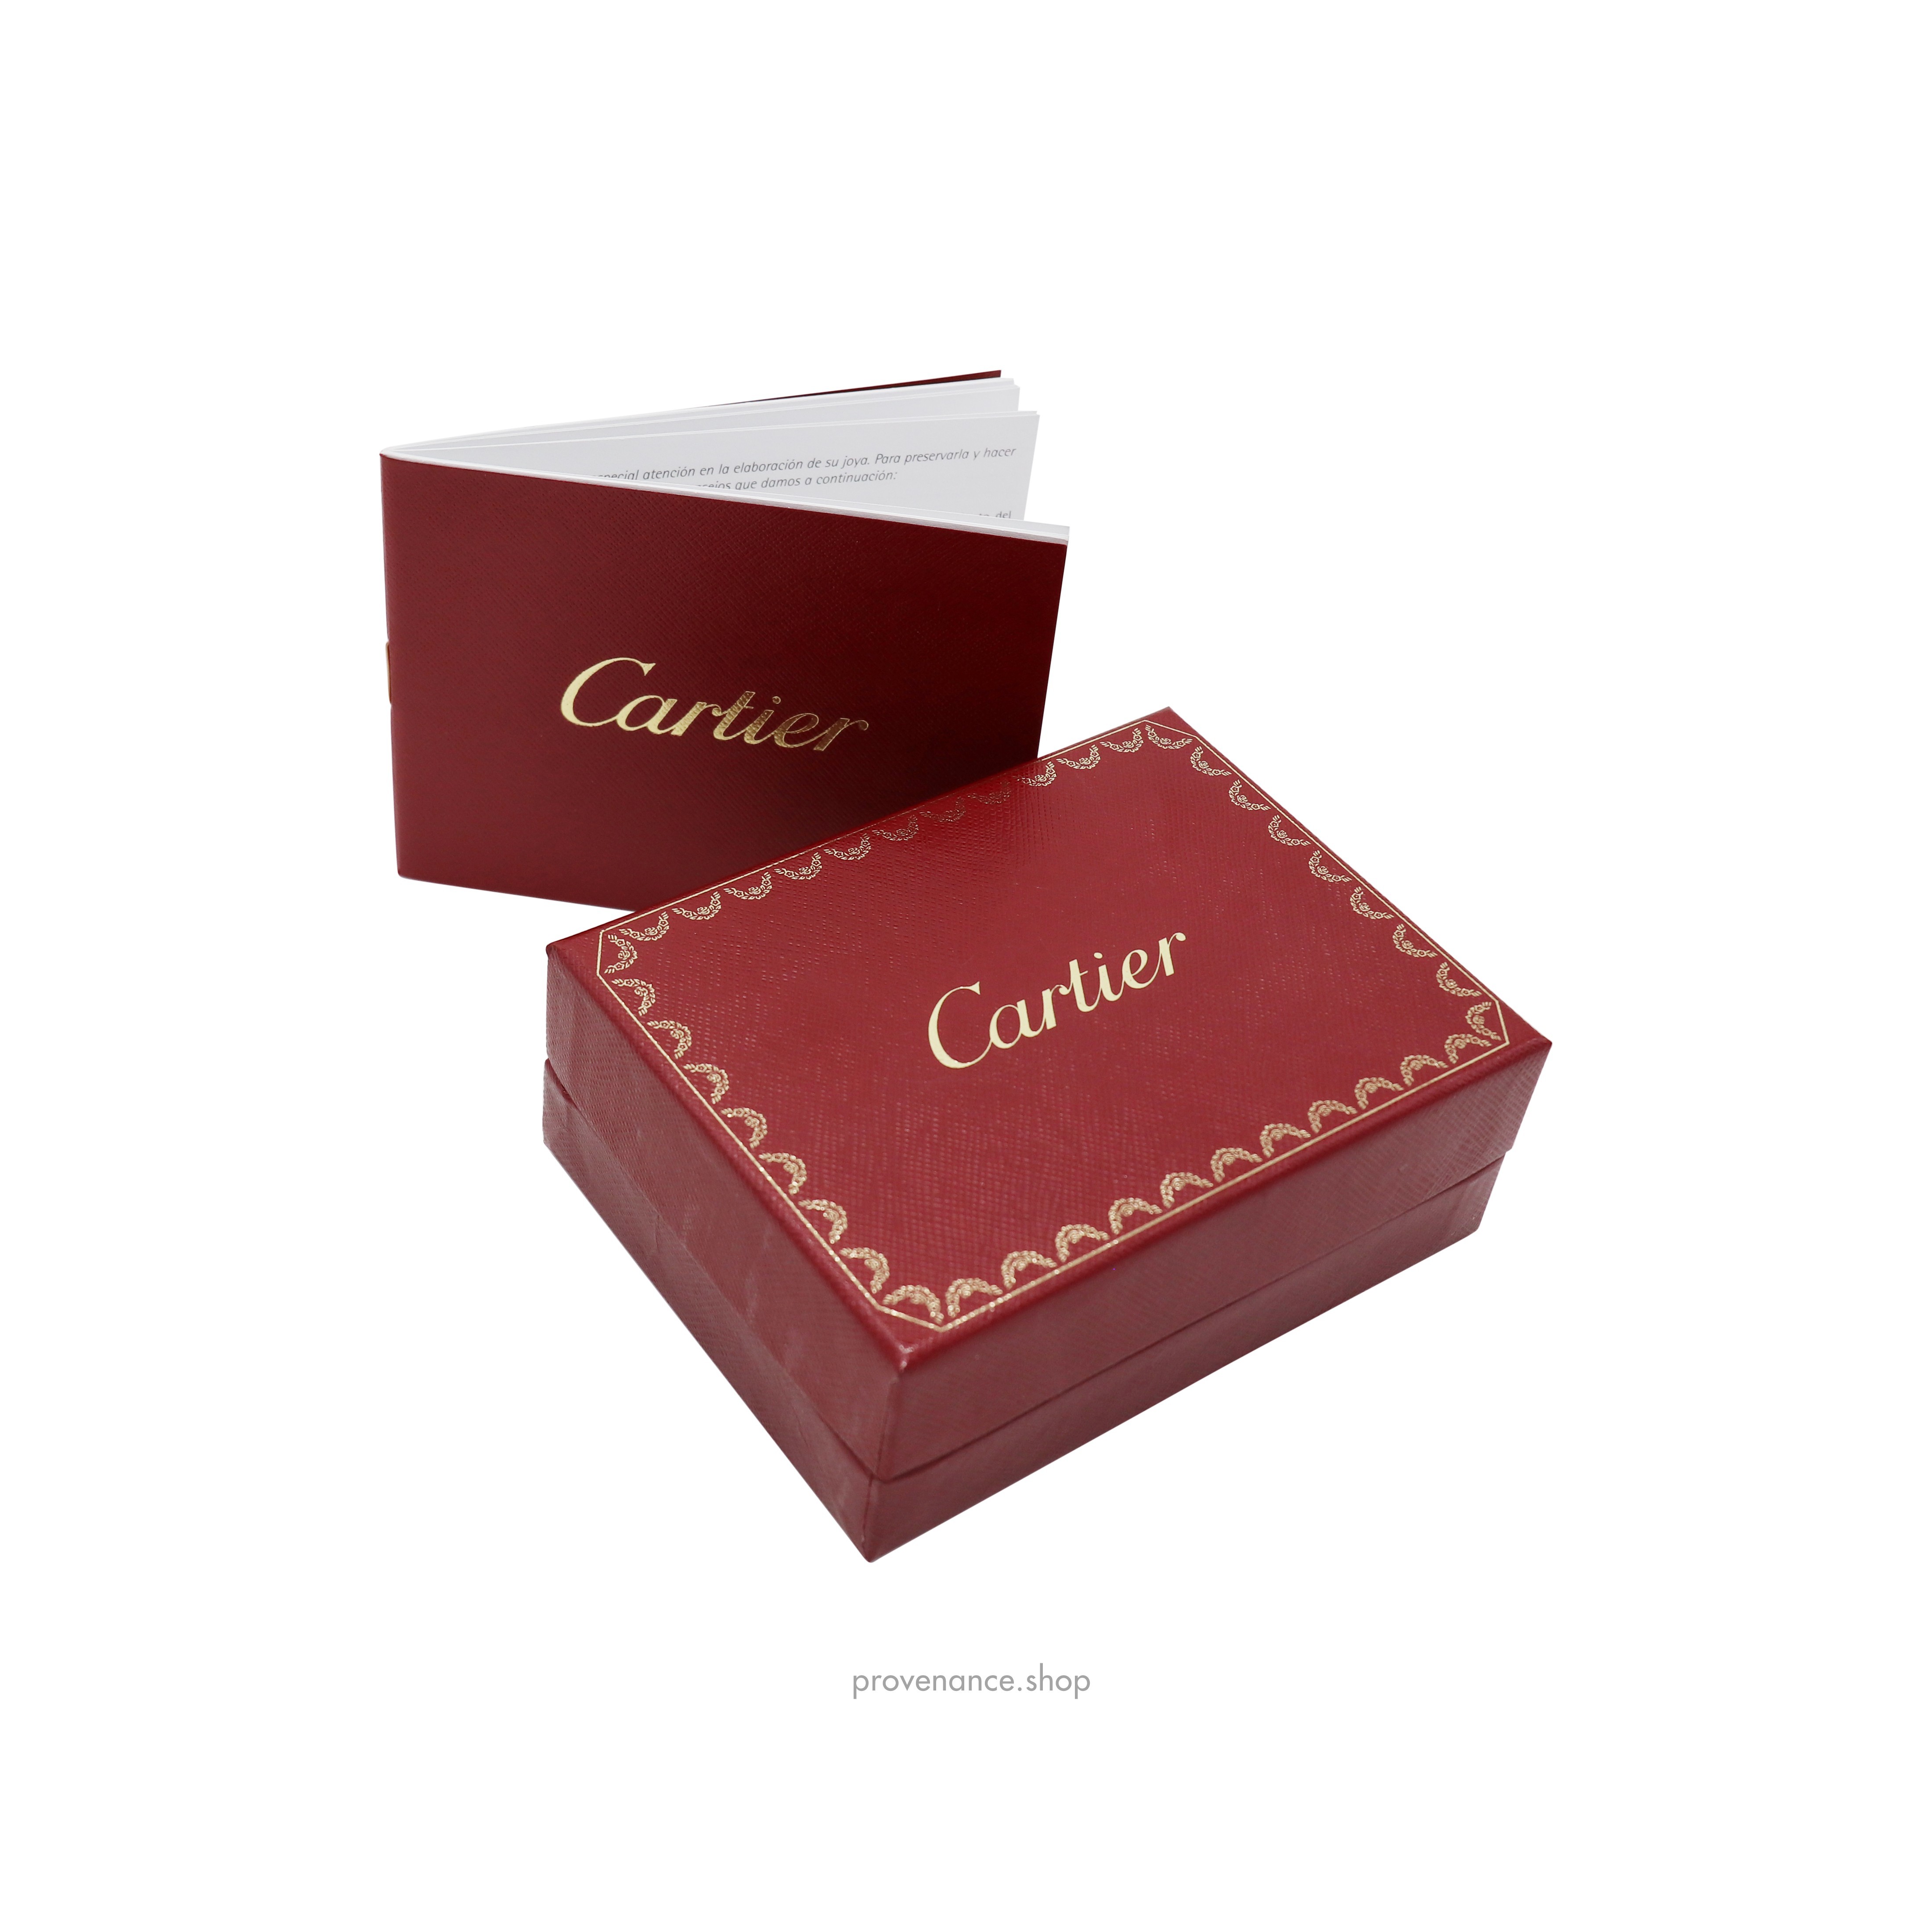 Cartier Jewelry Cleaning Kit - 2